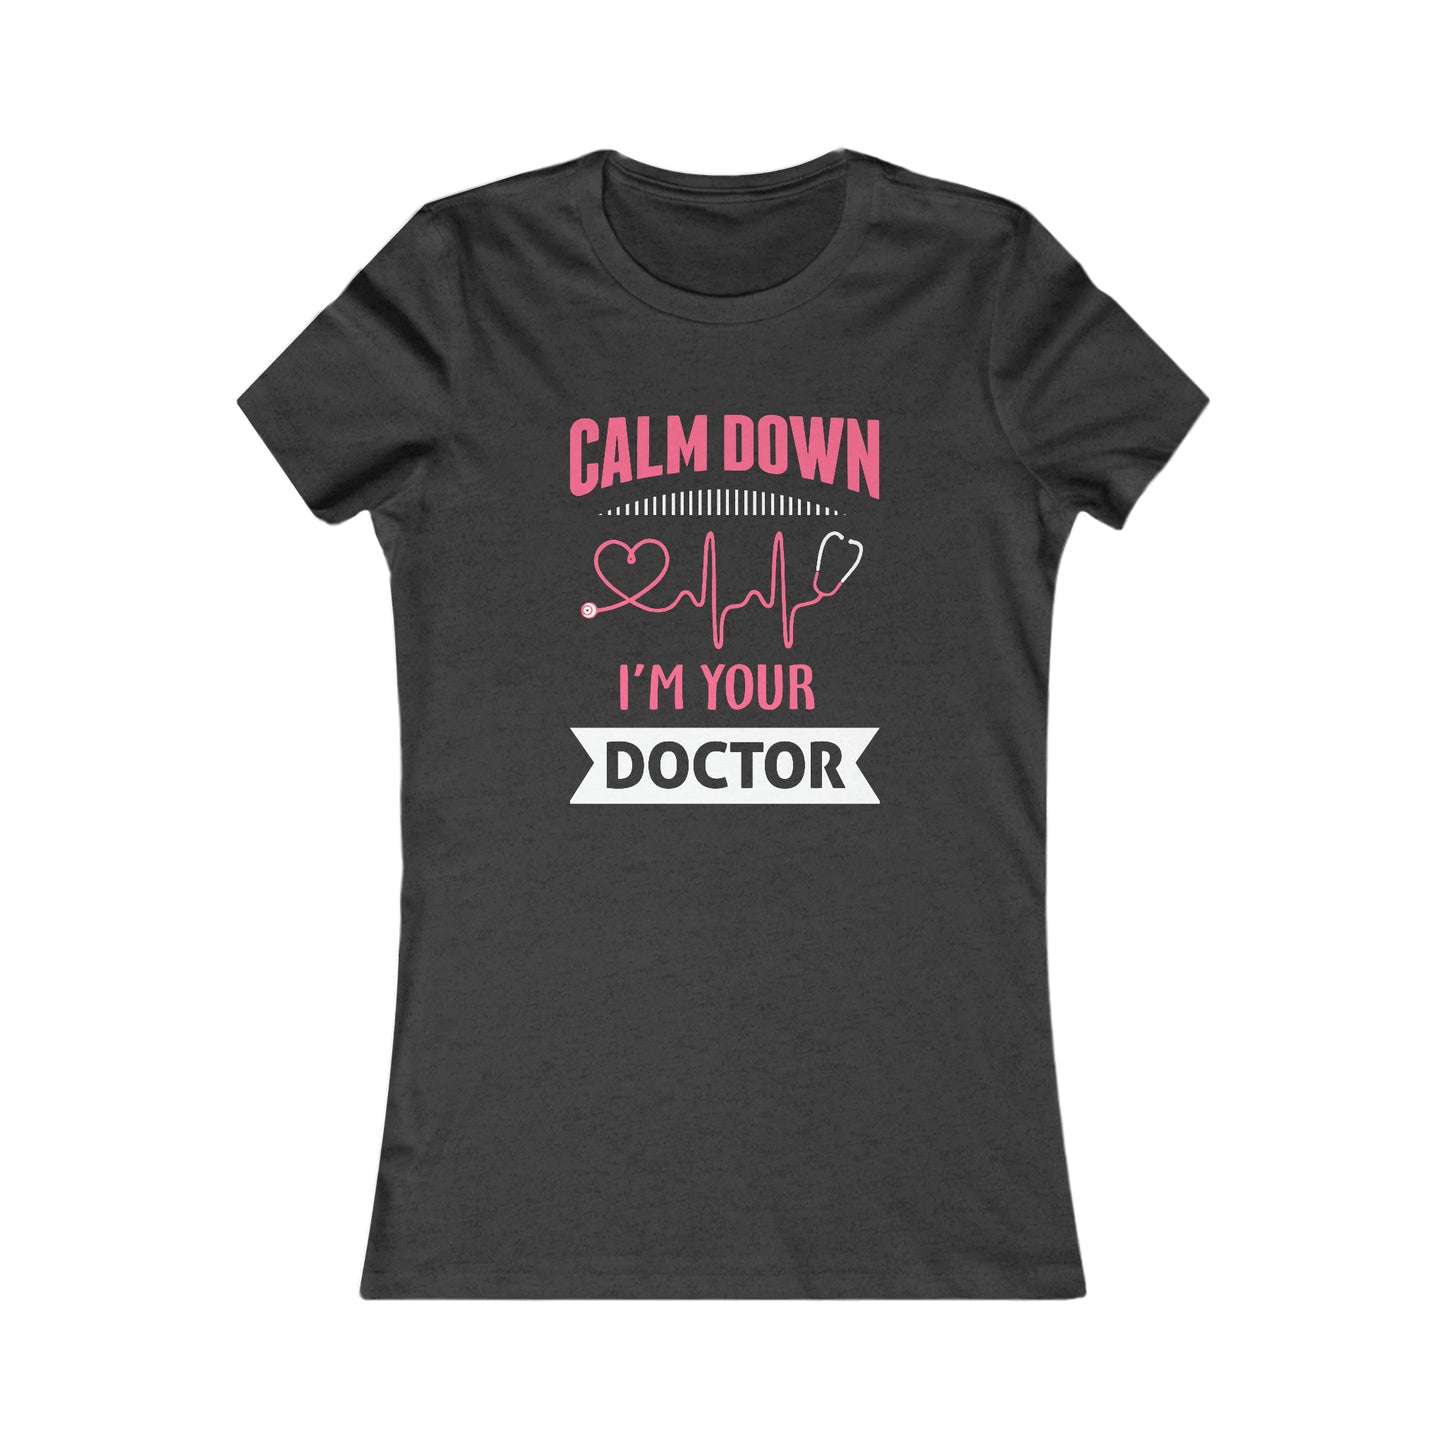 Calm Down I'm Your Doctor Women's Favorite Tee, Doctor shirts, Doctor gift ideas, New Doctor shirt, Future doctor shirt, gift for doctors